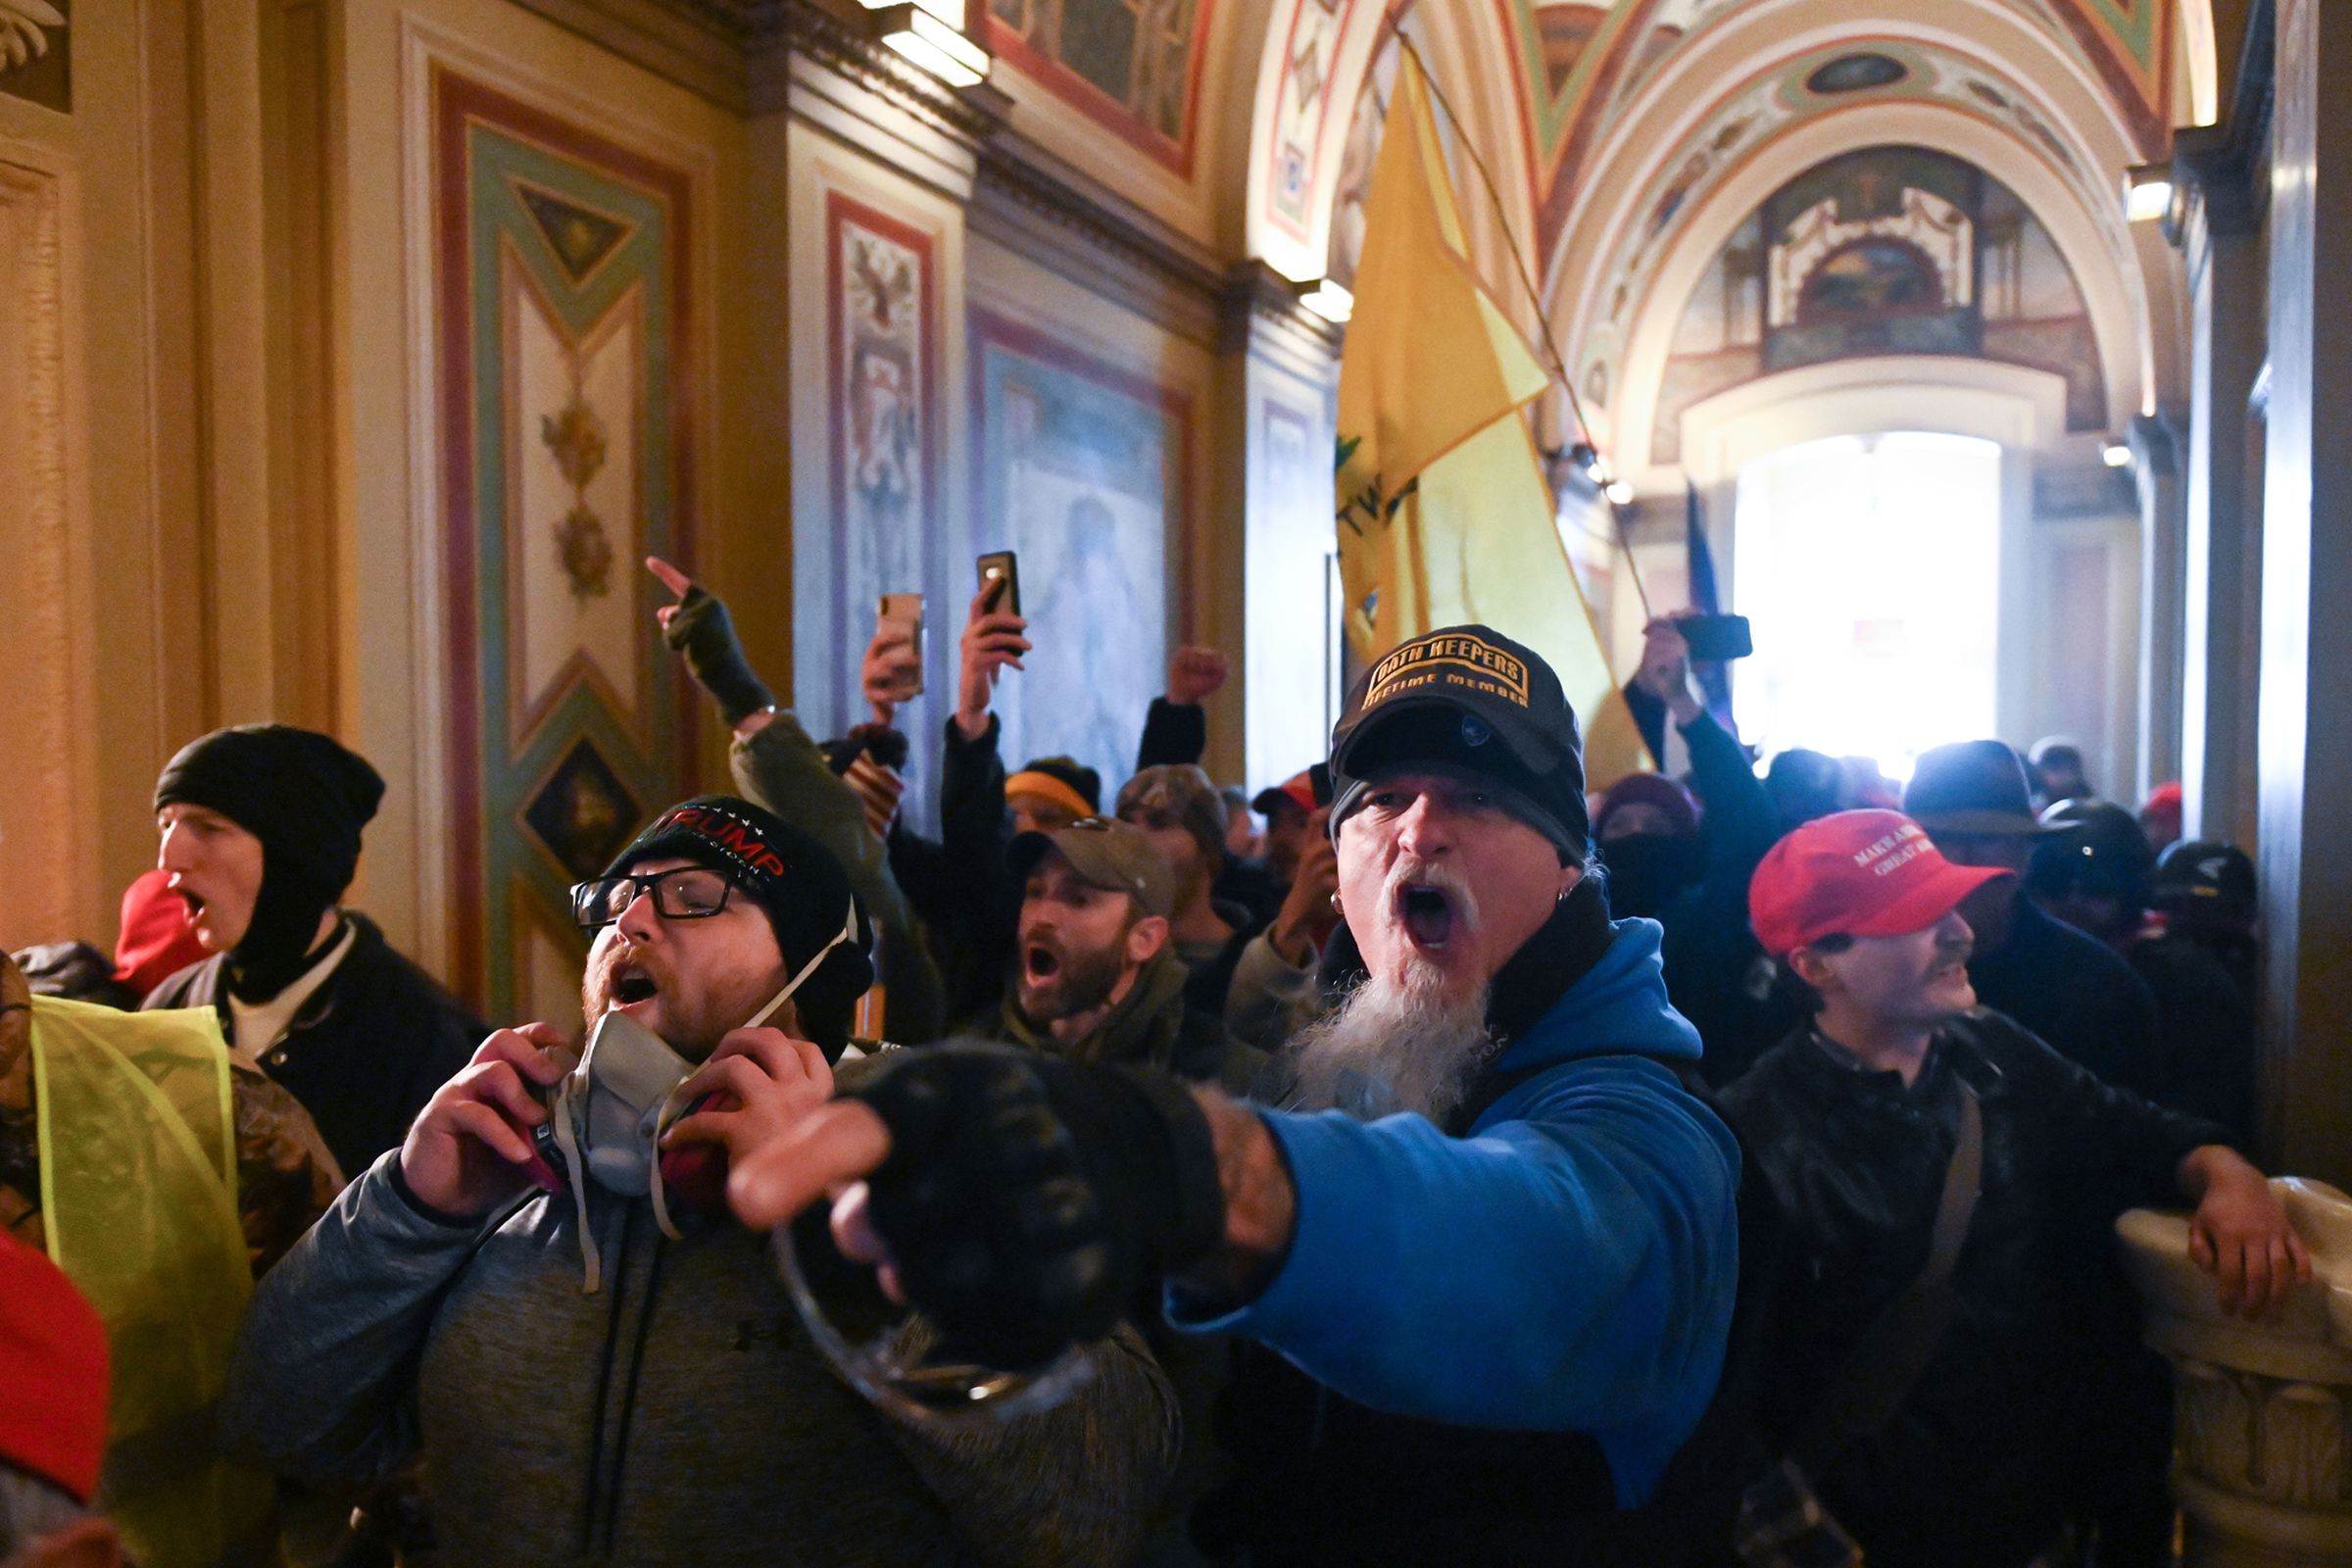 Demonstrators breached security, flooding into restricted zones of the Capitol.